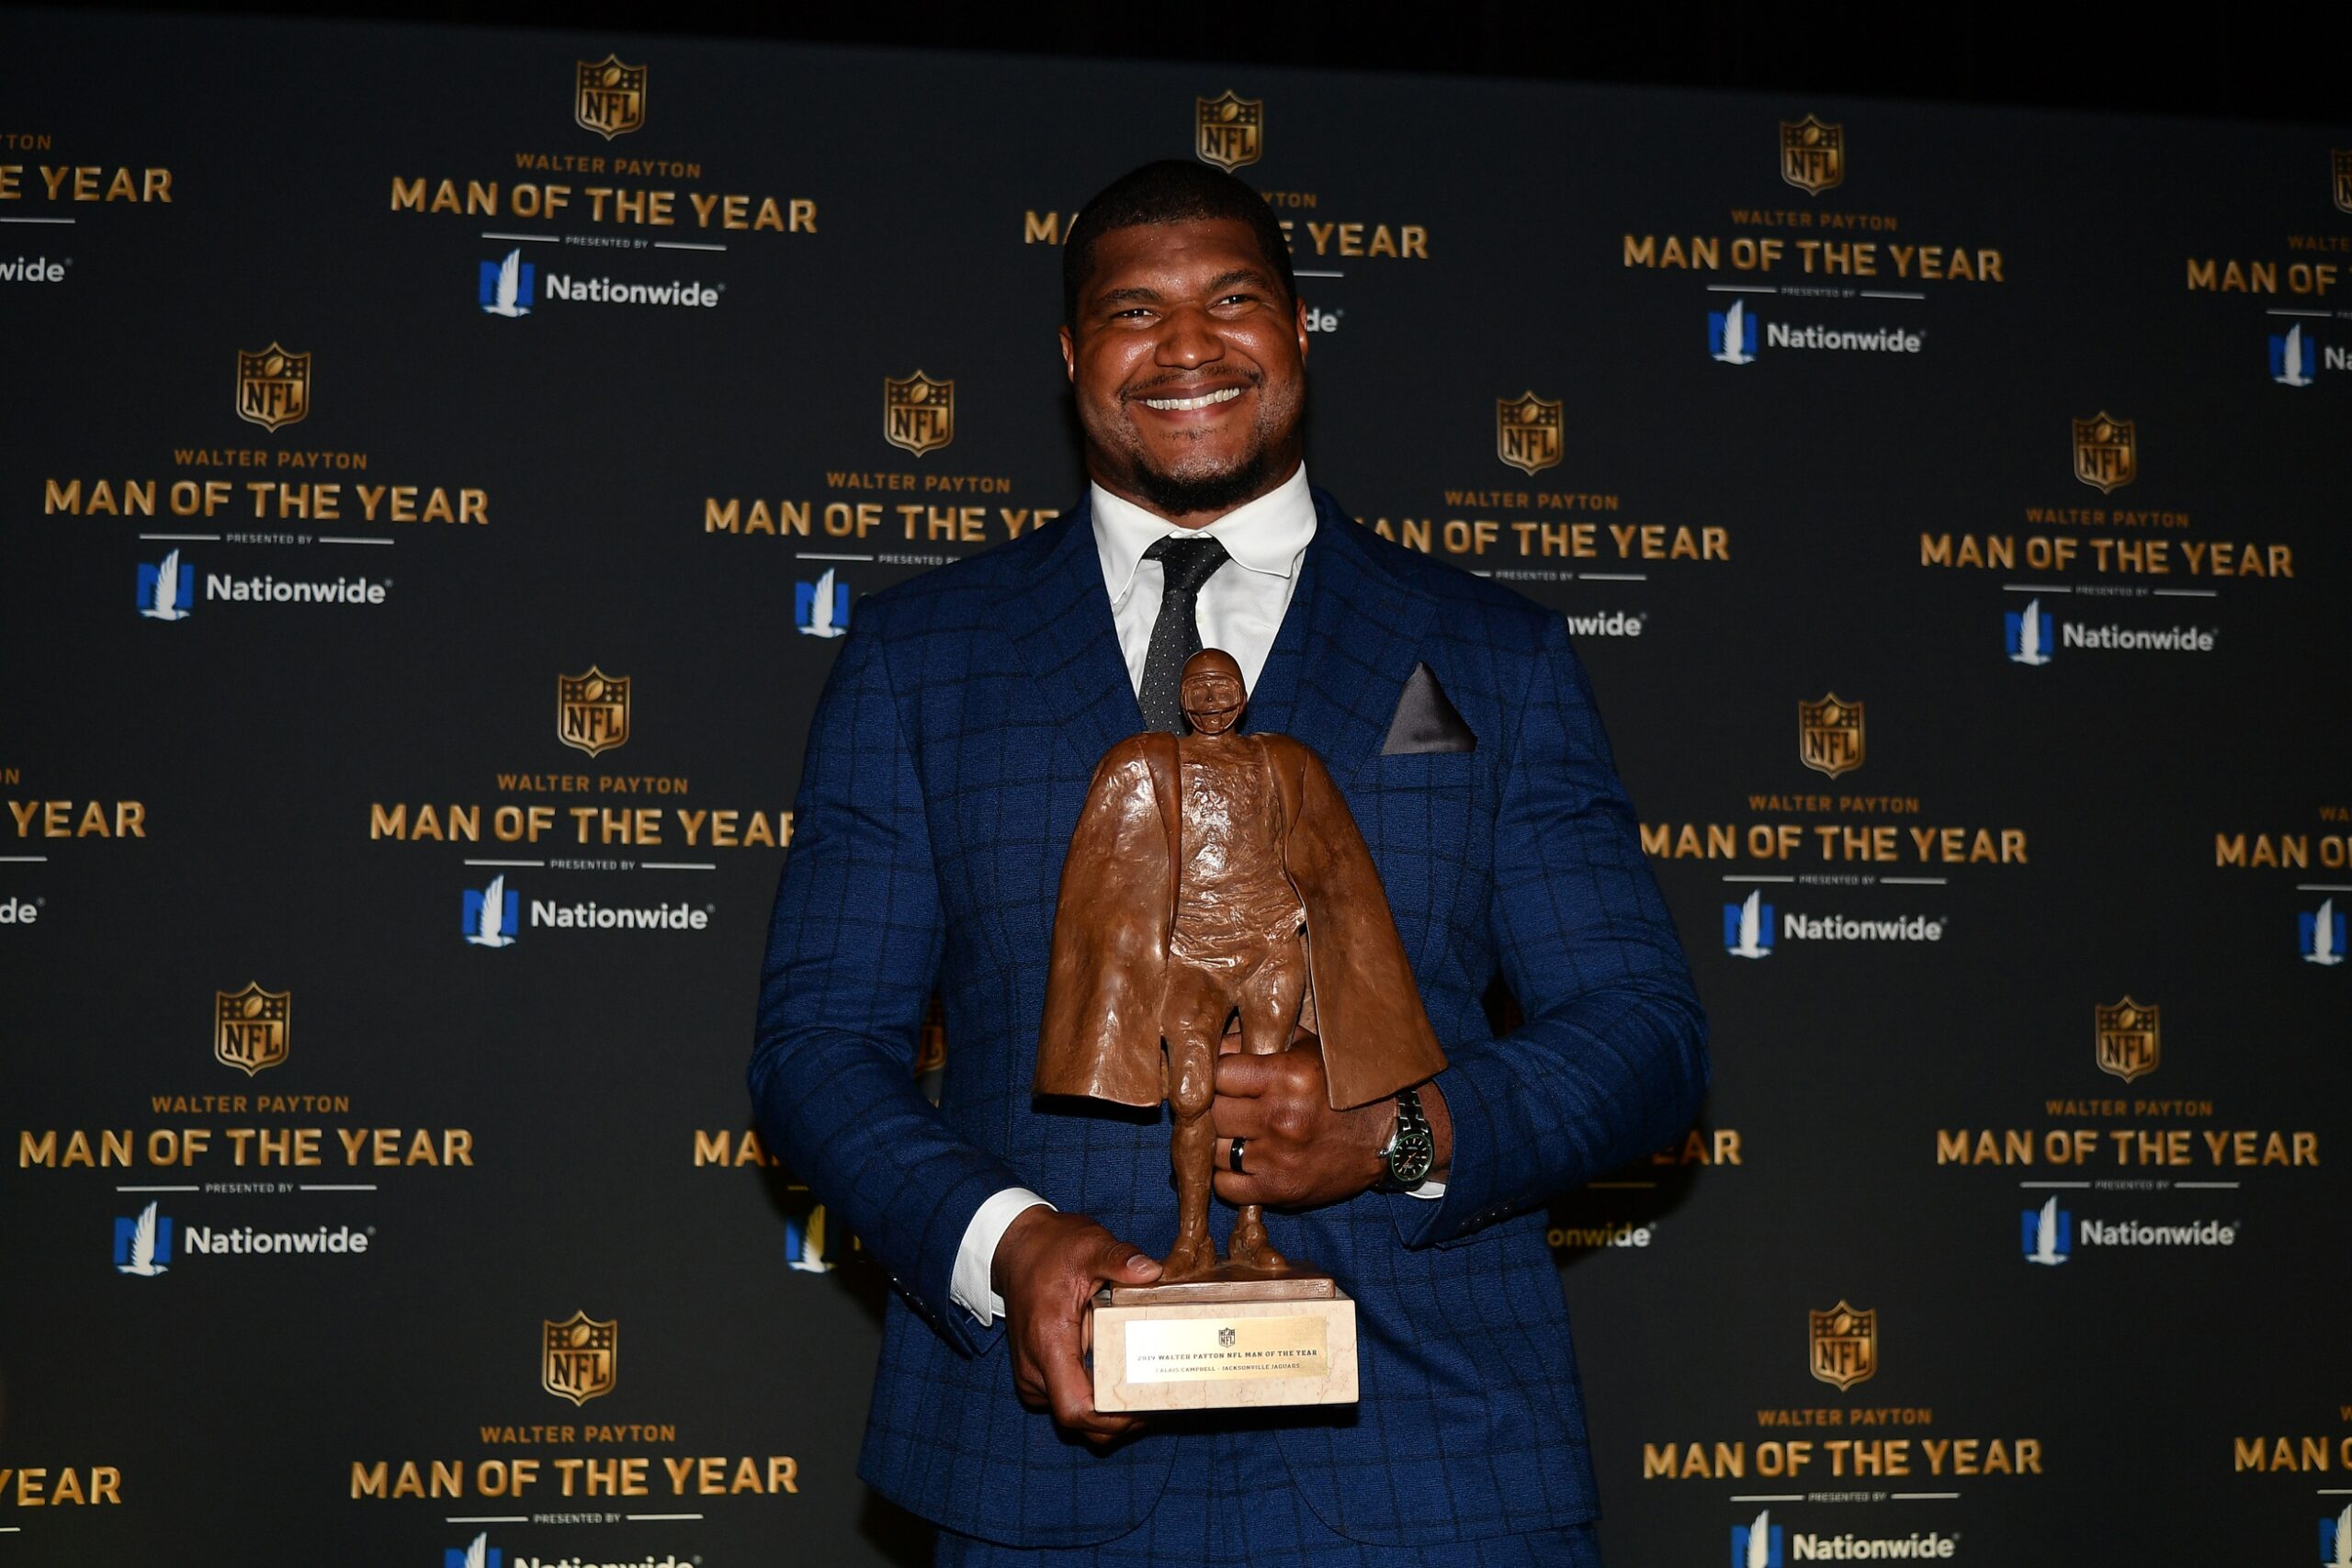 Jacksonville Jaguars Calais Campbell poses for pictures with the Walter Payton NFL Man of the Year Award in 2020.